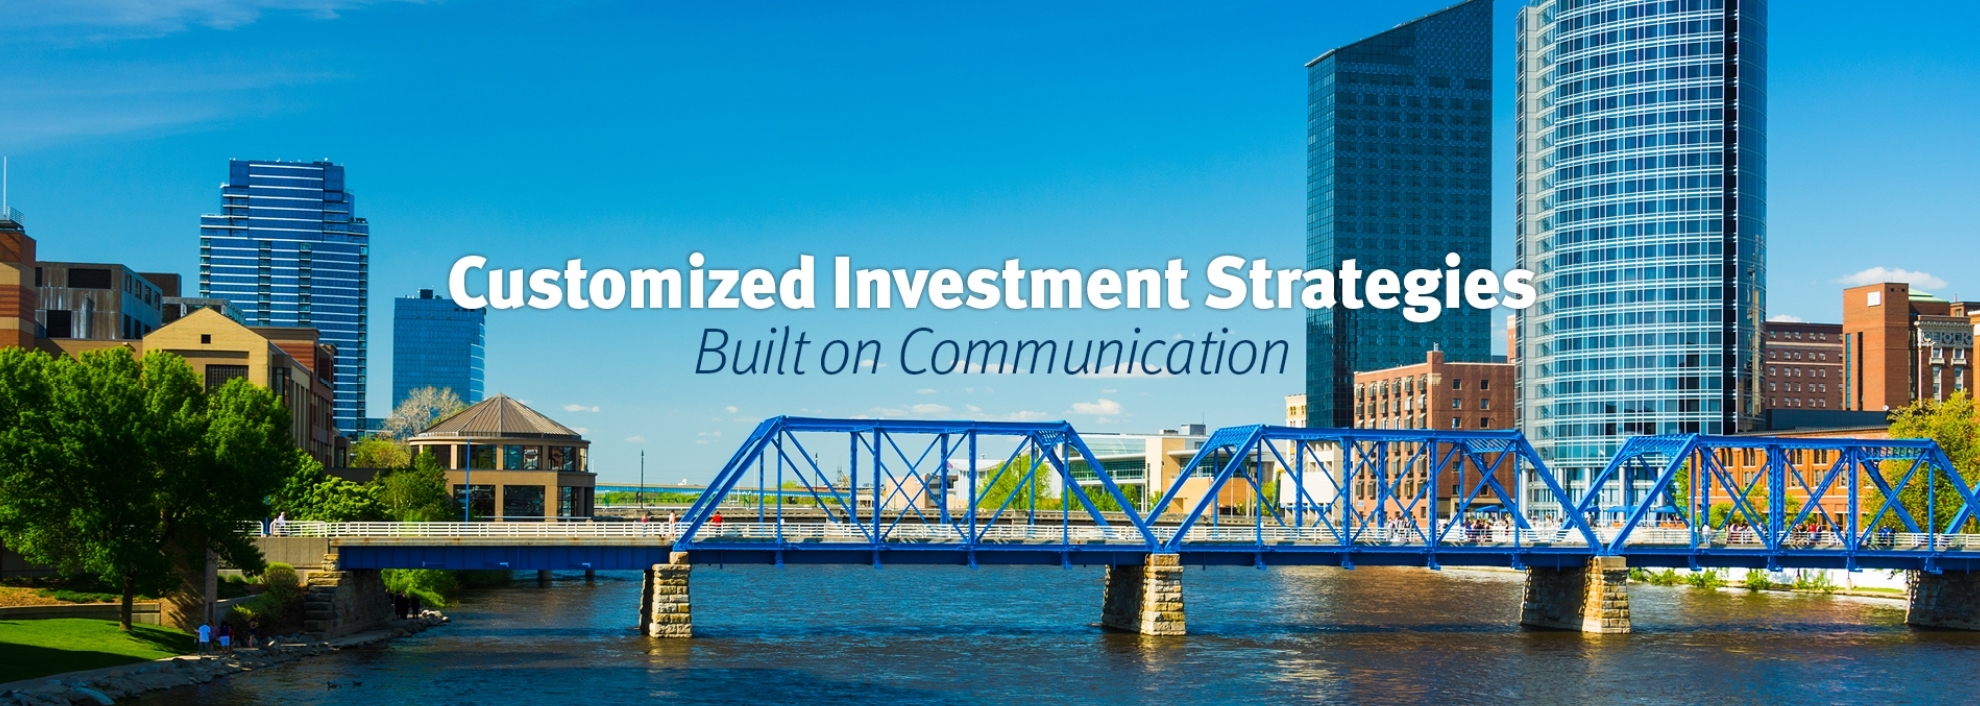 Customized Investment Strategies Built on Communication